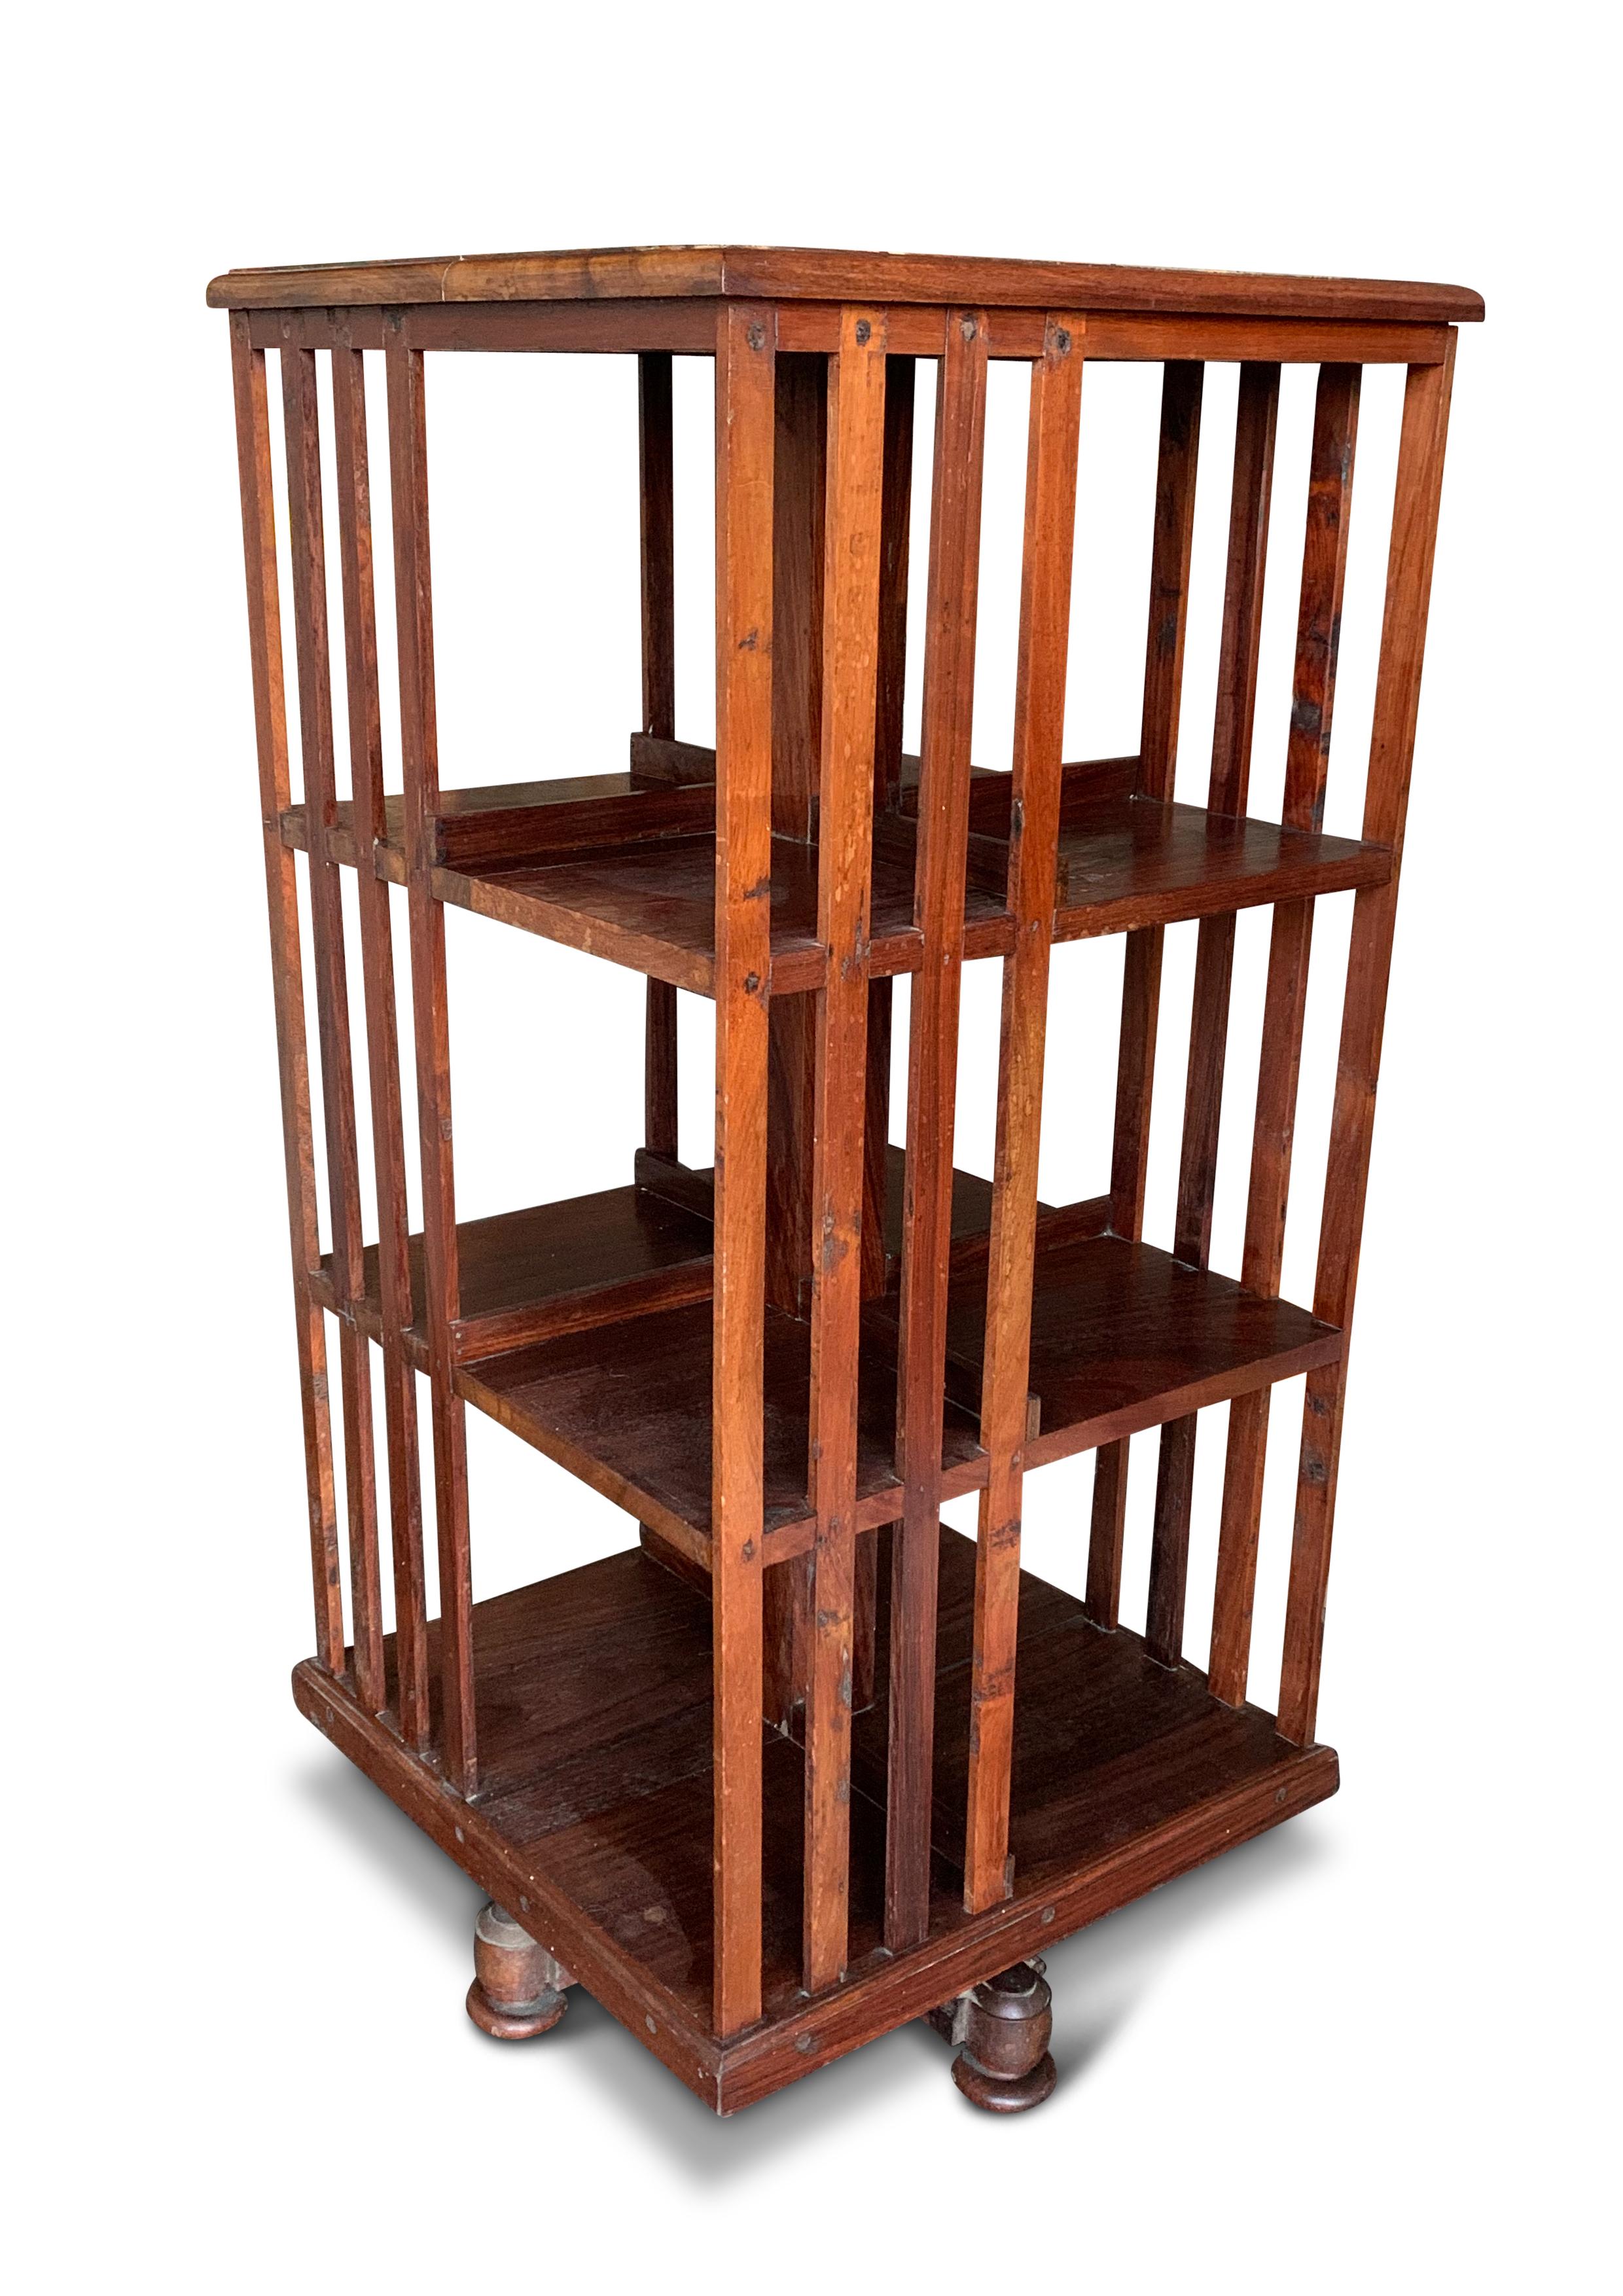 Victorian Revolving Three Tier Library Bookcase With Slatted Sections On A Graduated X Frame Revolving Base.

   